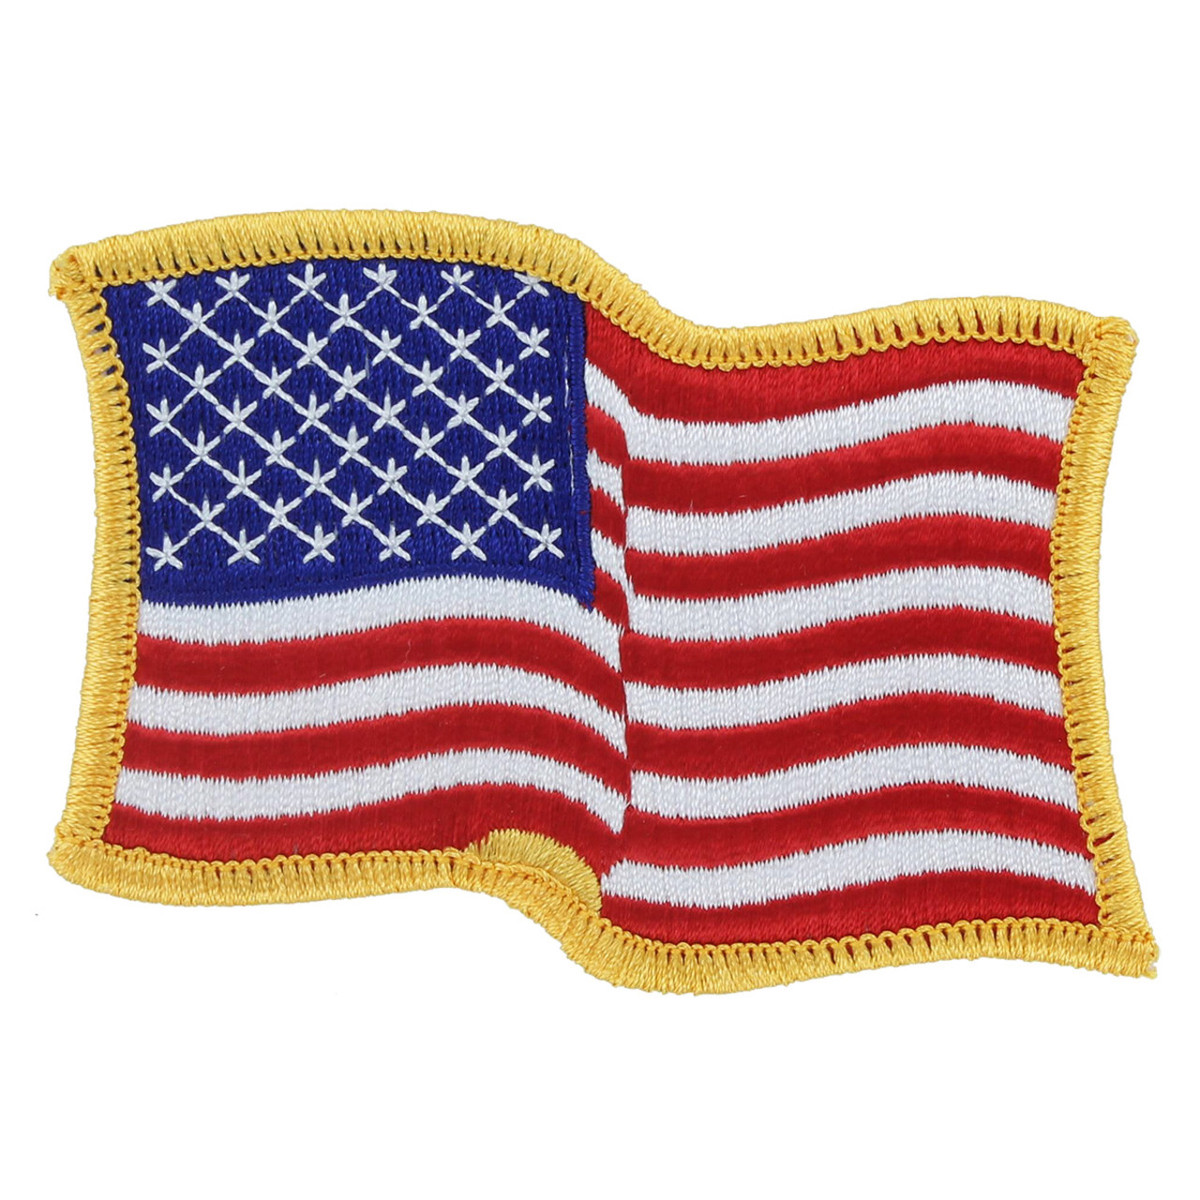 UNITED STATES OF AMERICA FLAG PATCH: Waving Gold Border